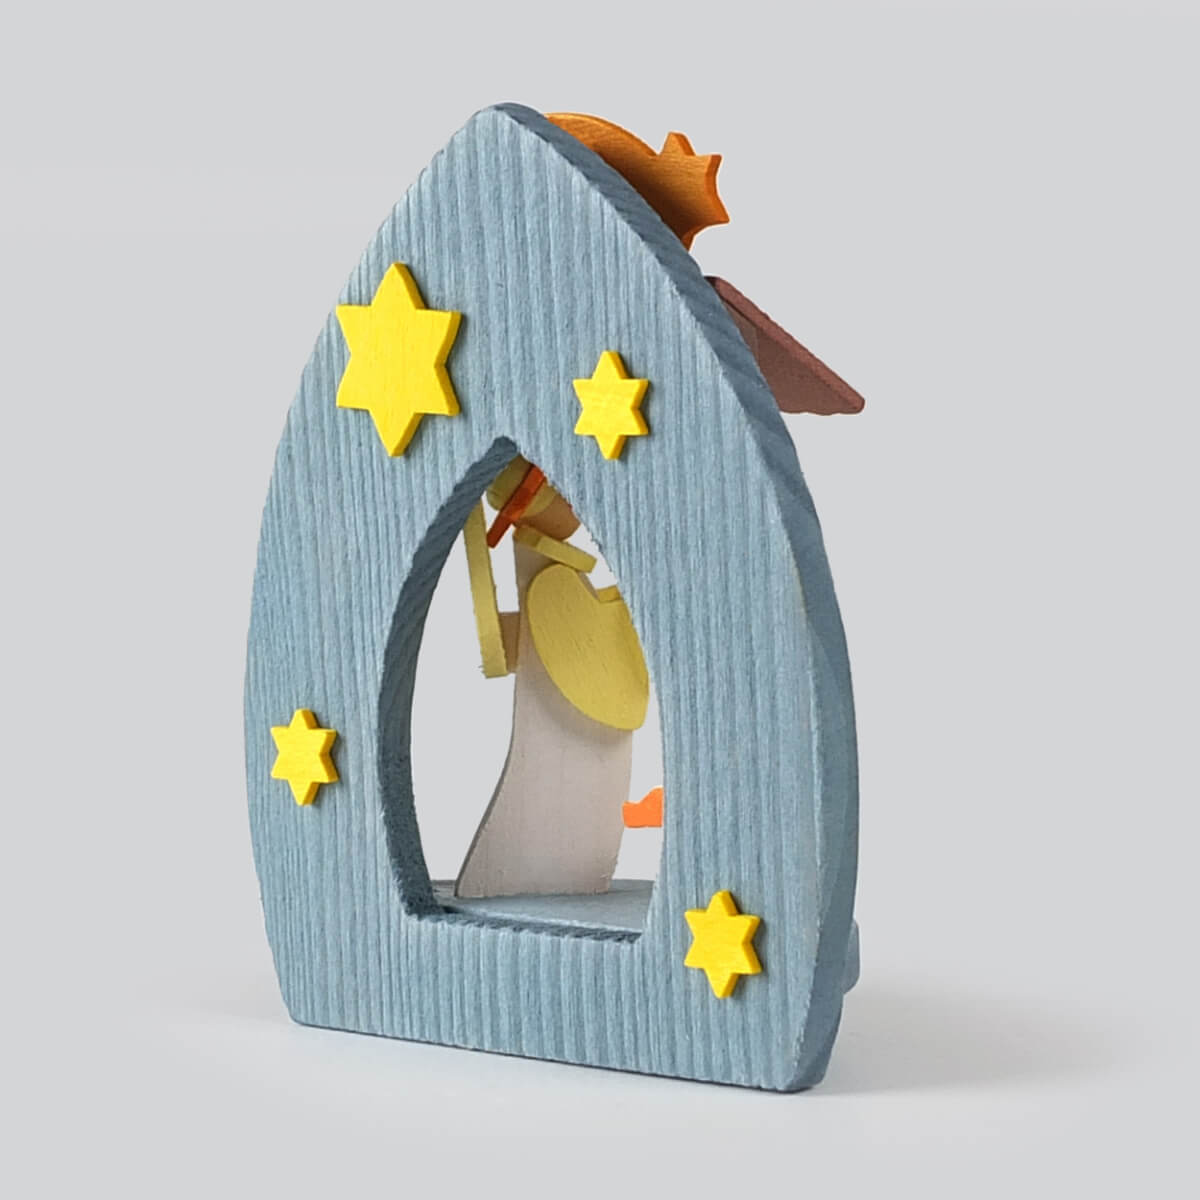 Manger 'The Nativity' Ornament with balthasar